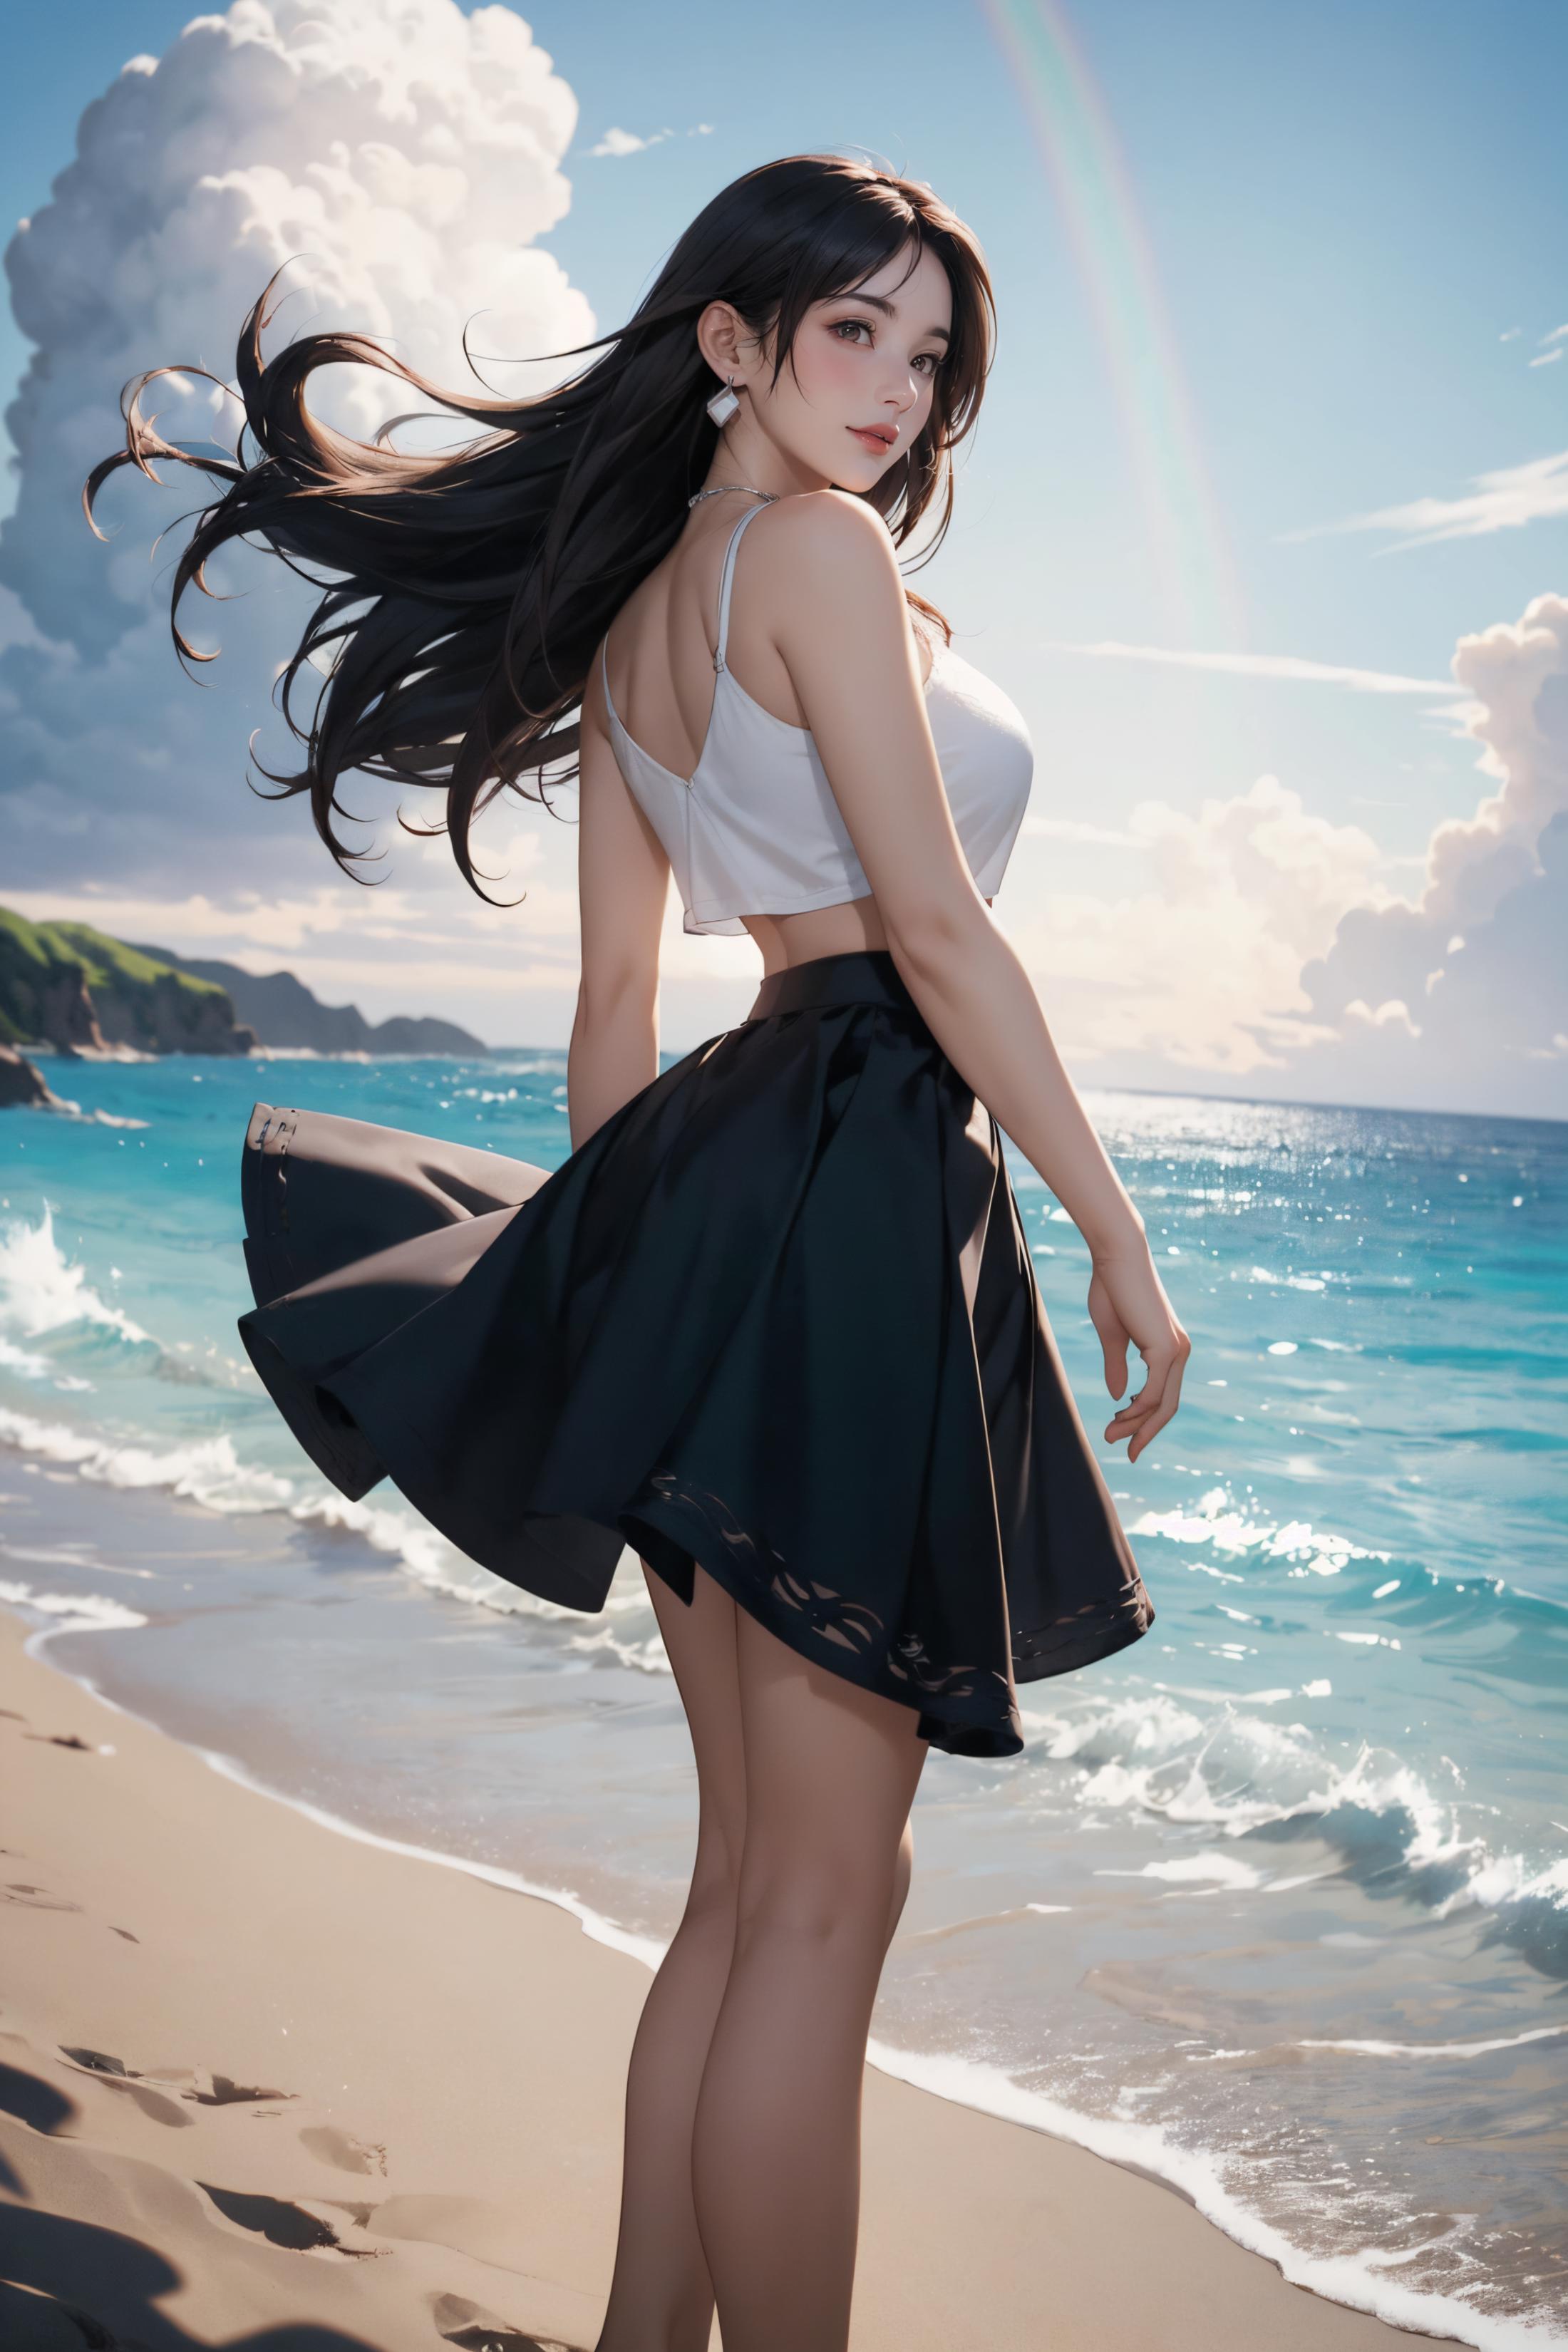 Tifa from Final Fantasy 7 image by gen558